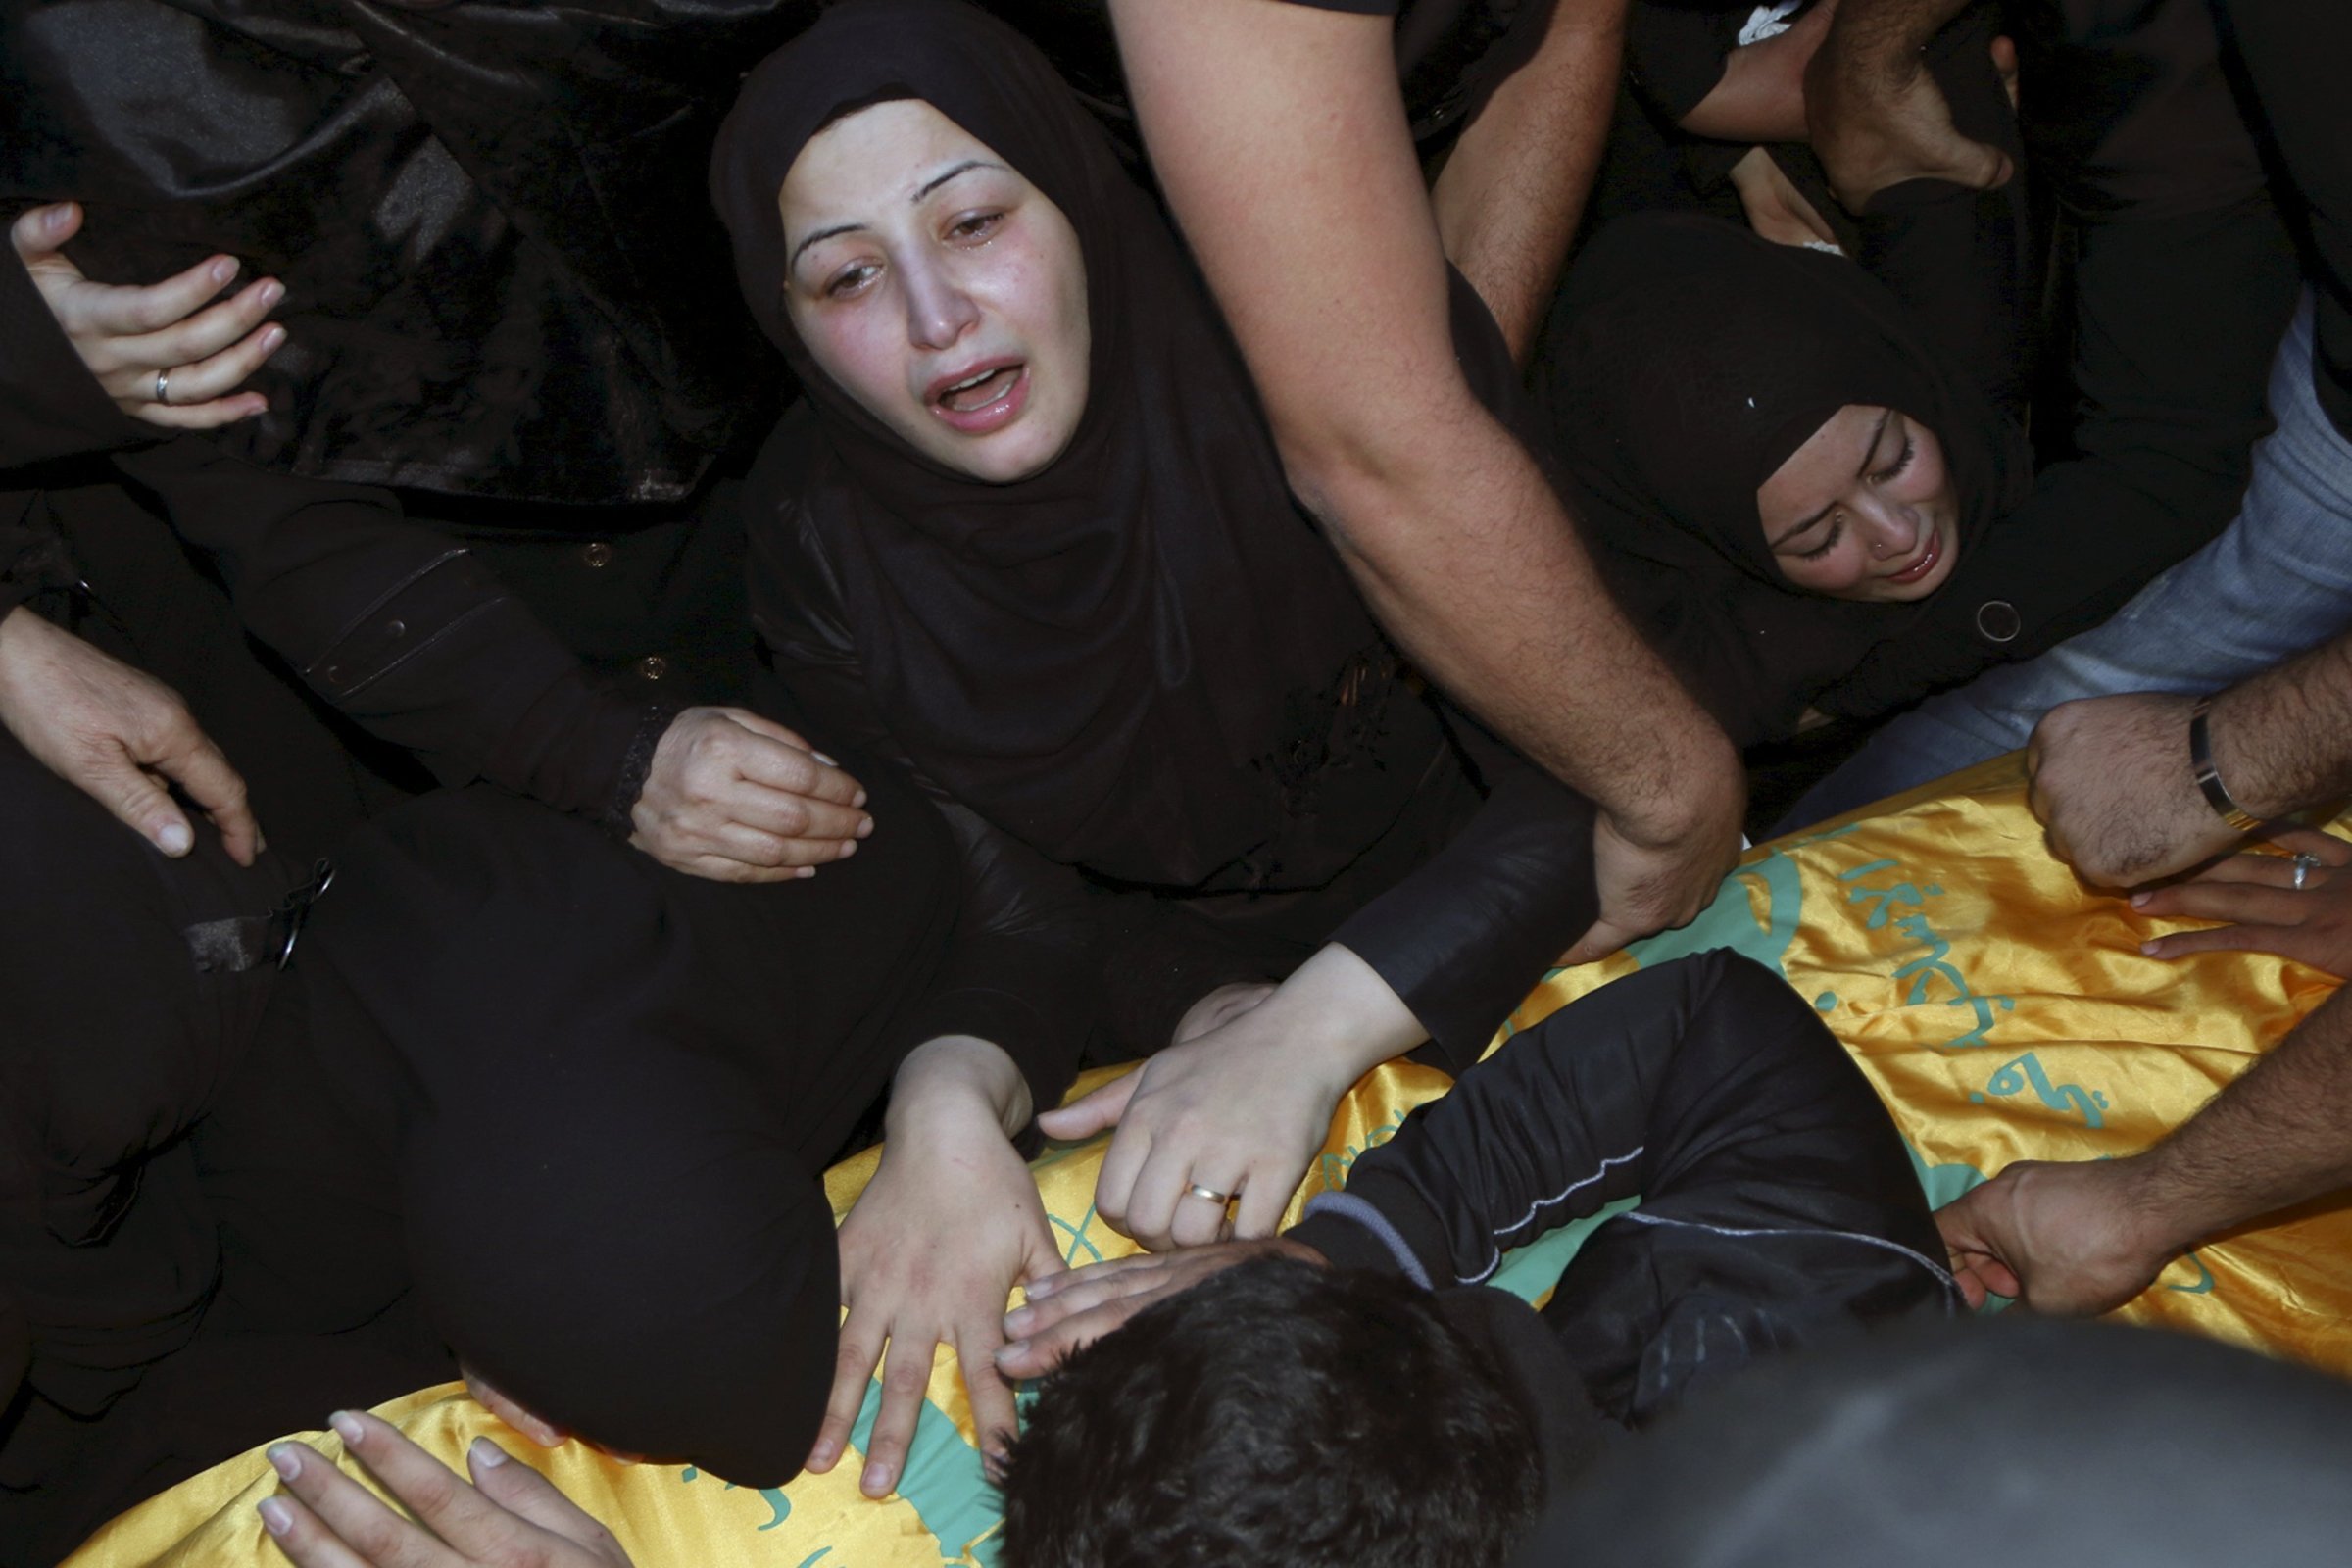 Relatives mourn over the coffin of Hezbollah member, Adel Akram Termos, who was killed in the two explosions that occurred on Thursday in Beirut's southern suburbs, during his funeral in Tallousa village, southern Lebanon on Nov. 13, 2015.